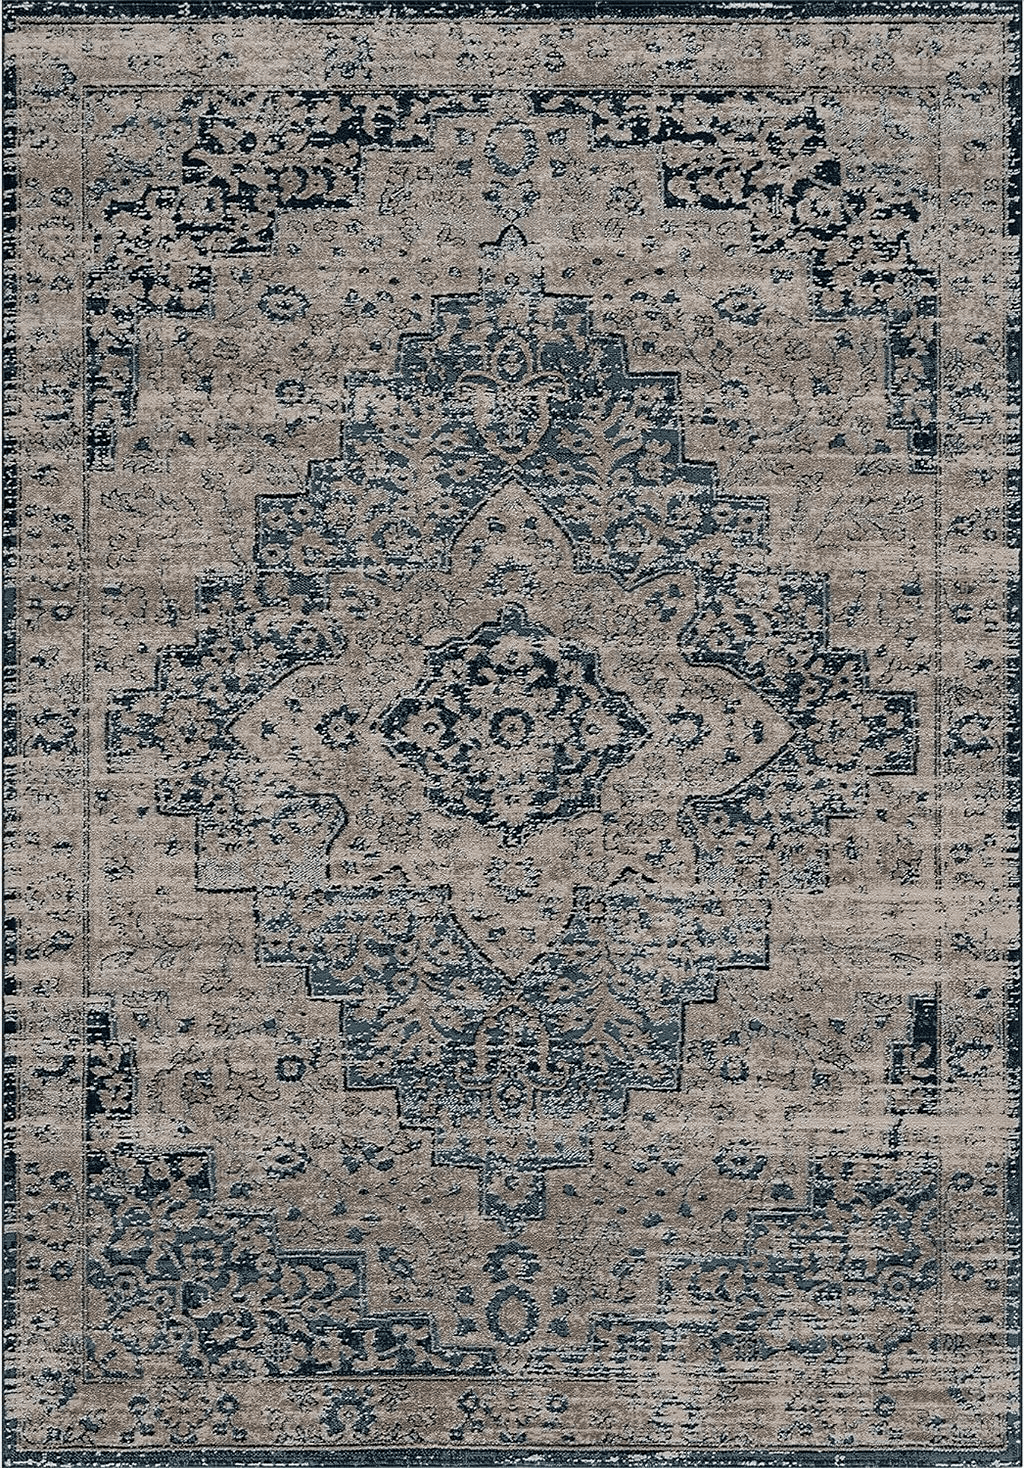 Caria Bloom Rugs Traditional Blue Gray Area Rug - Vintage Boho 5x7 Rug for Living Room, Bedroom and Kitchen (5'3" x 7'6")